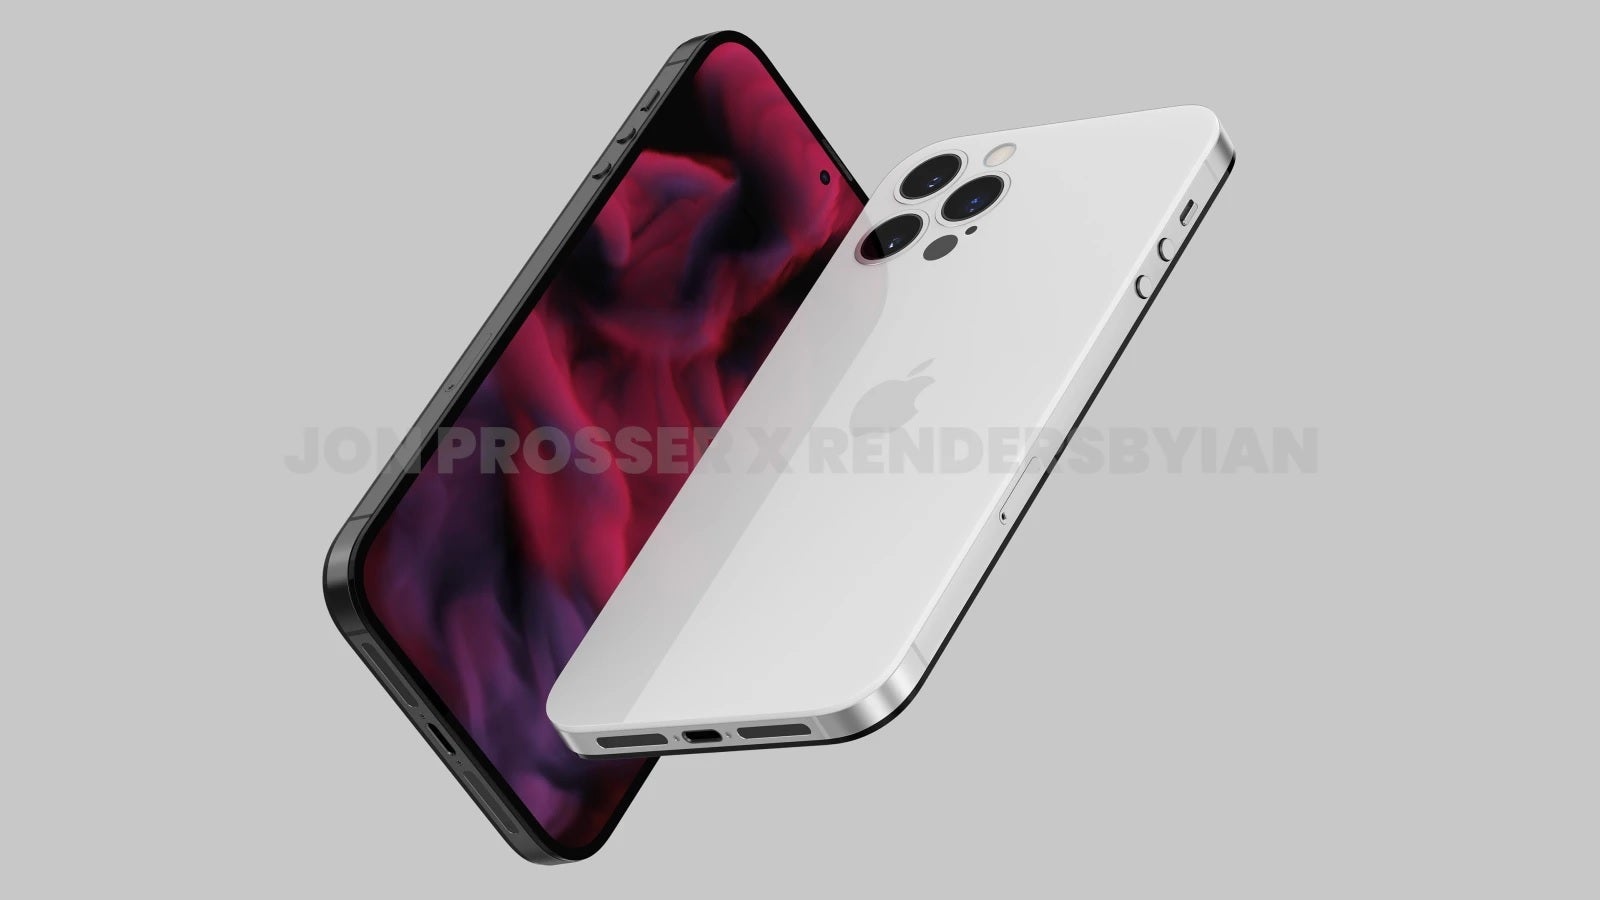 Render supposedly showing off an iPhone 14 model - Kuo says under-display Touch ID and a foldable iPhone are both pushed back one year